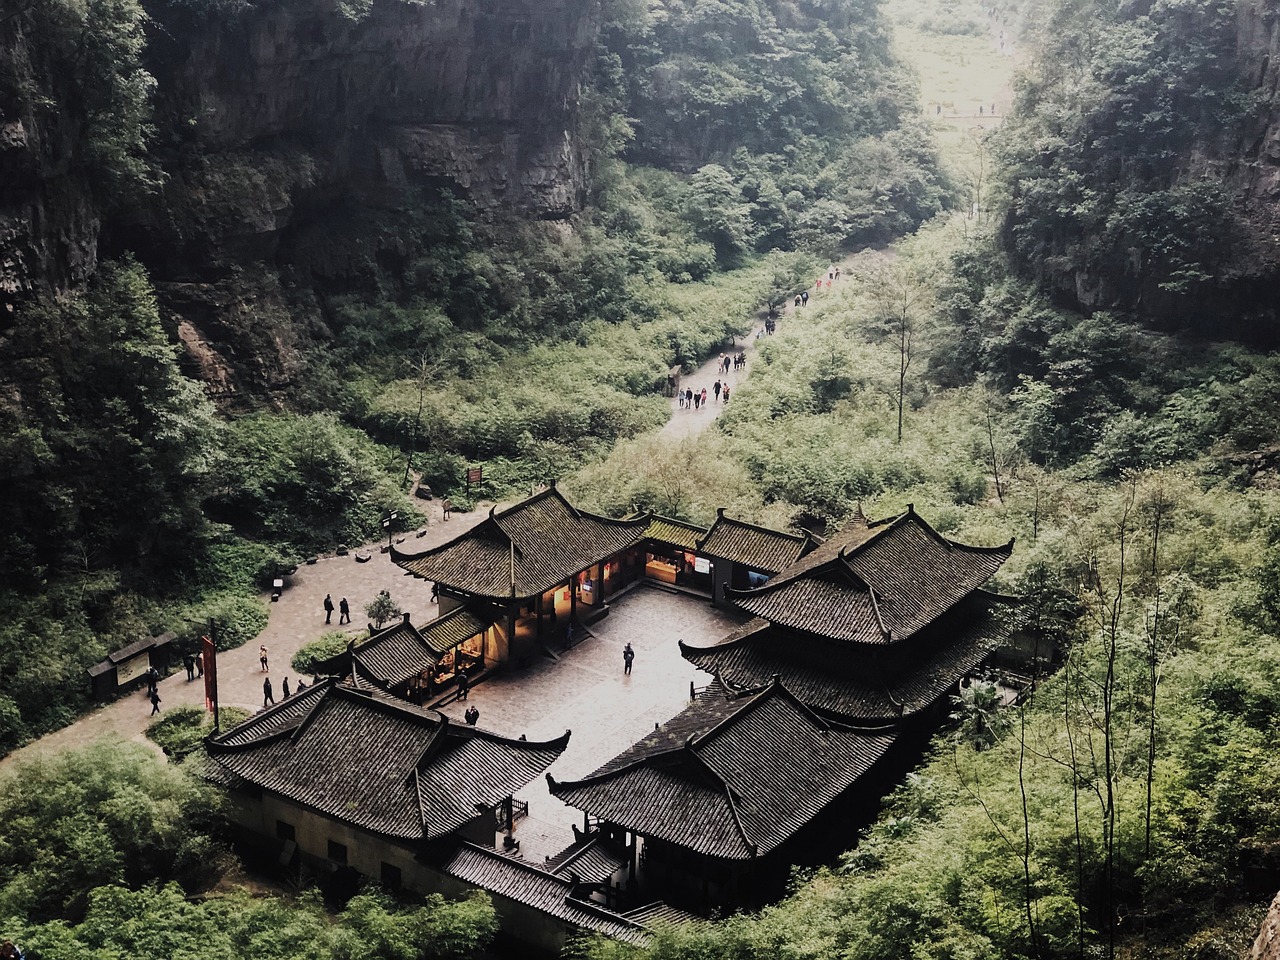 Discovering the Natural Wonders of Wulong